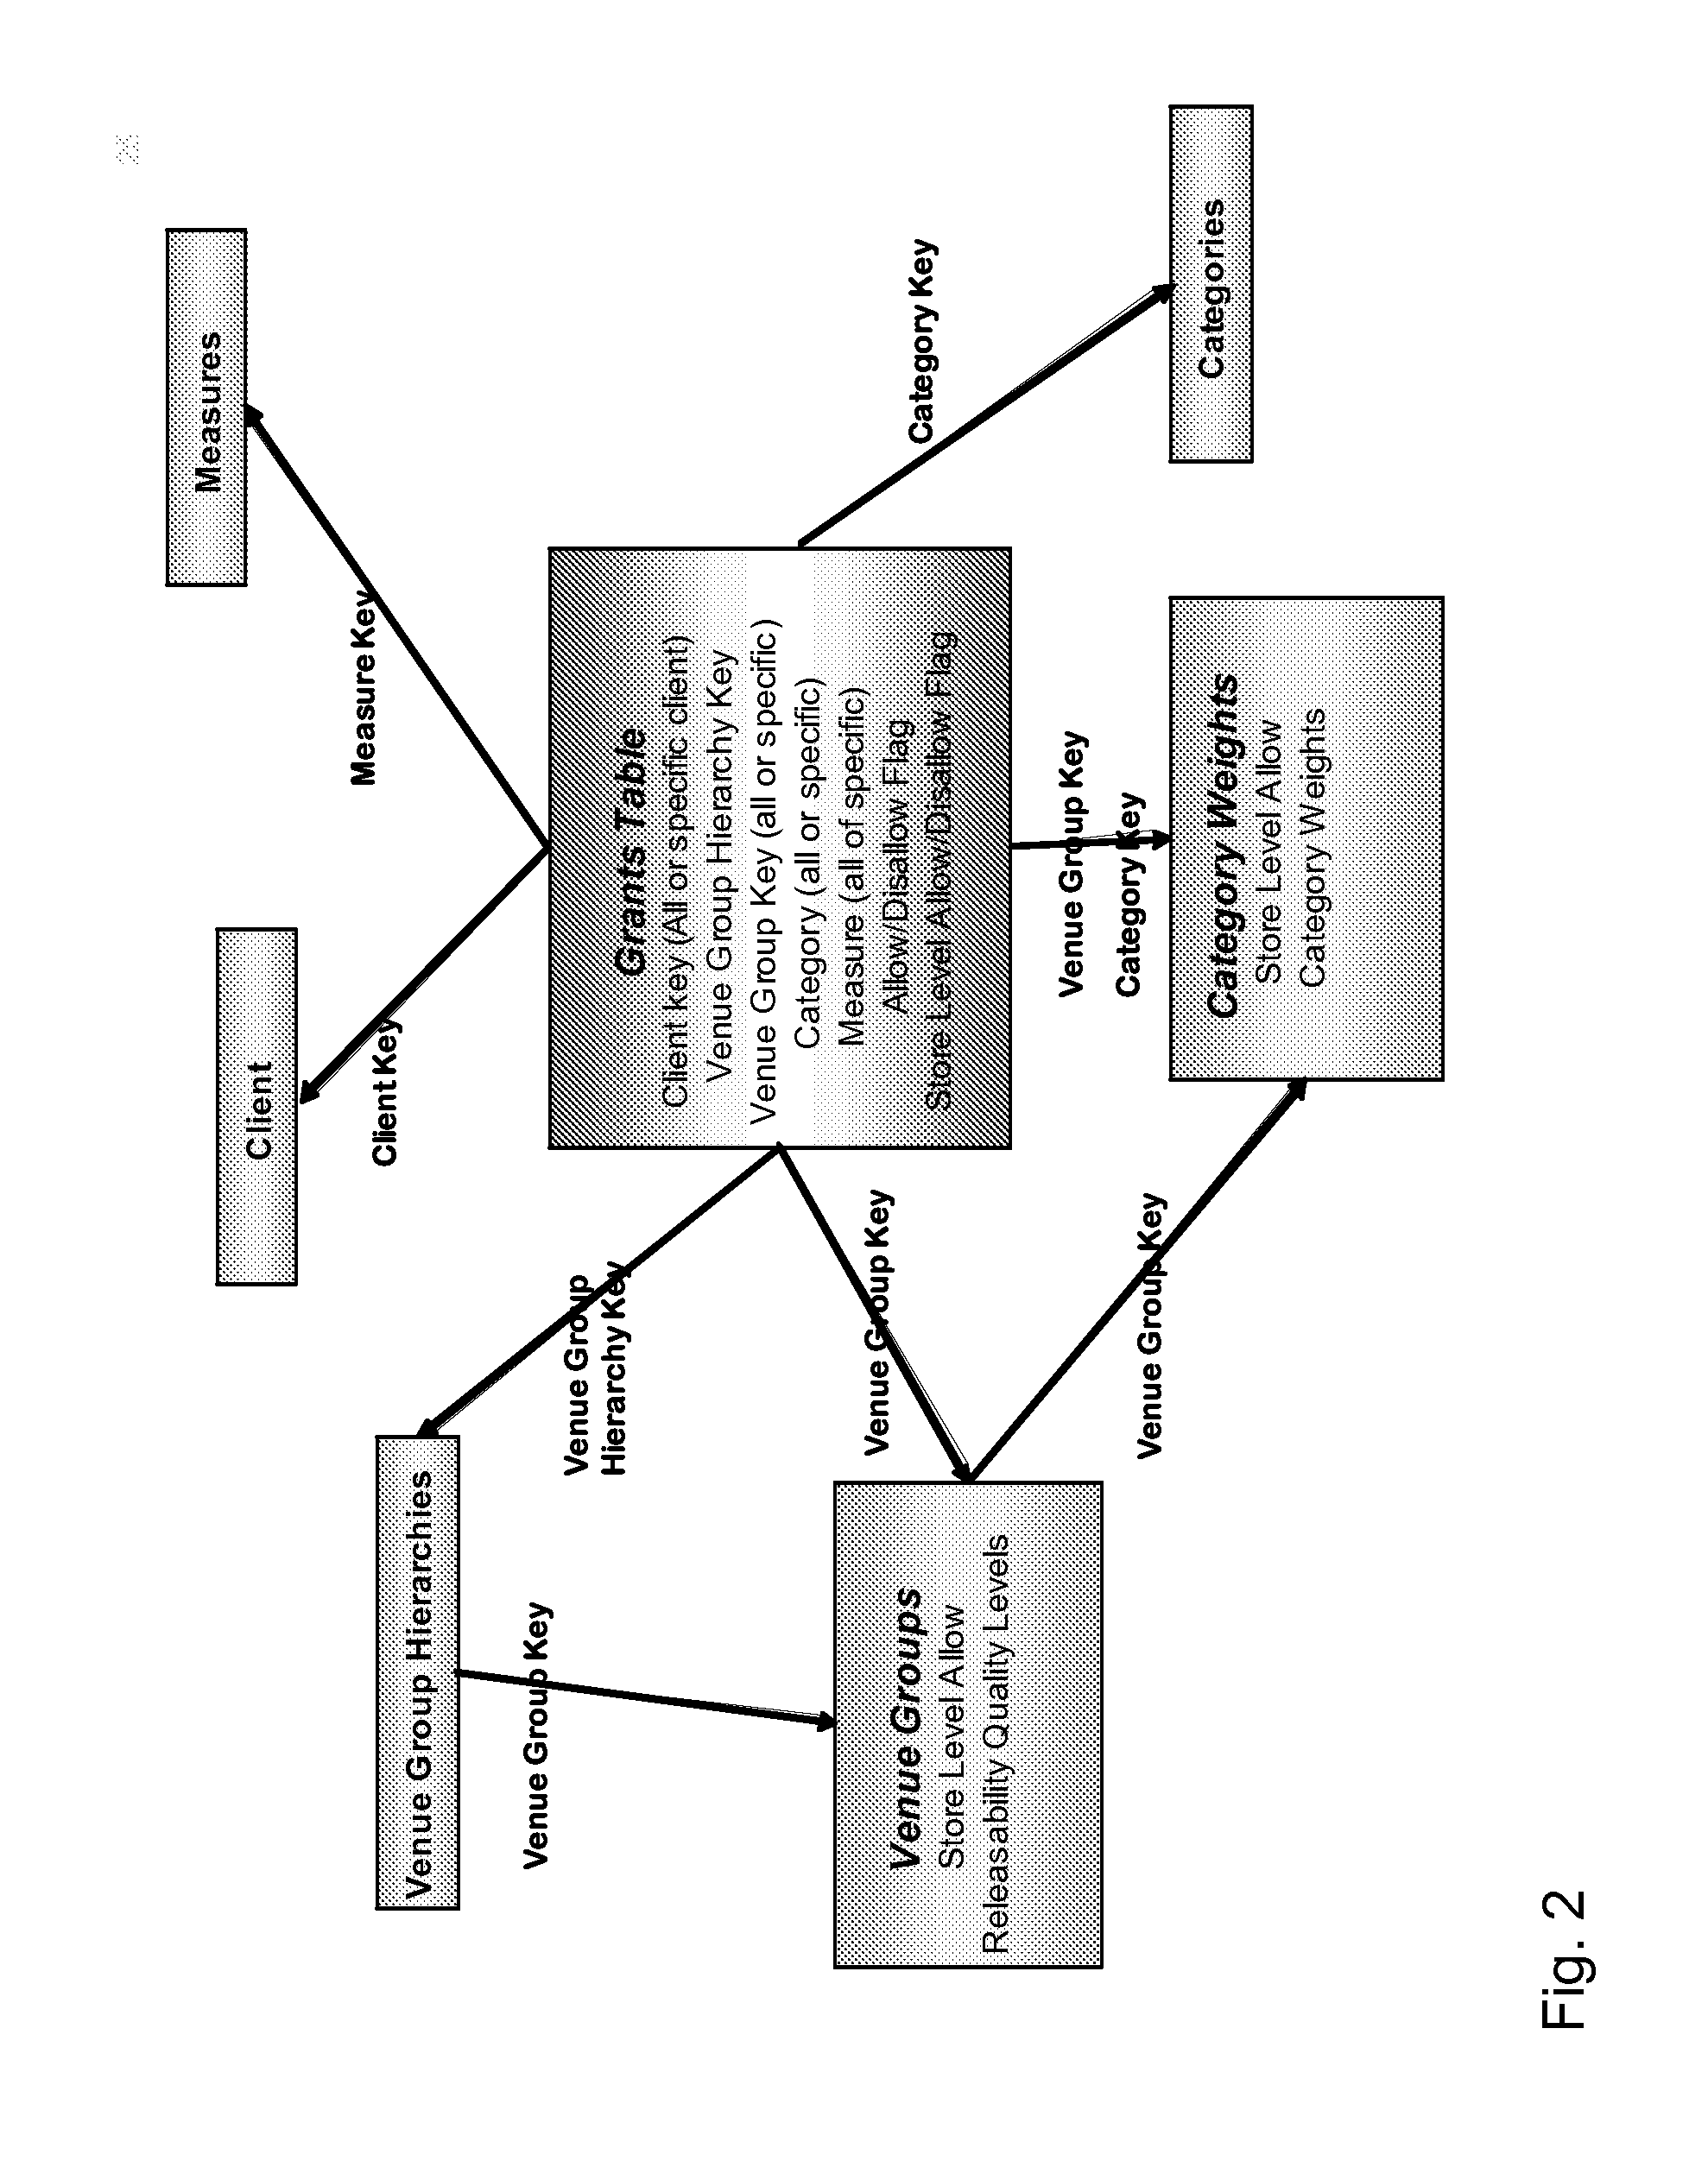 Cluster processing of a core information matrix